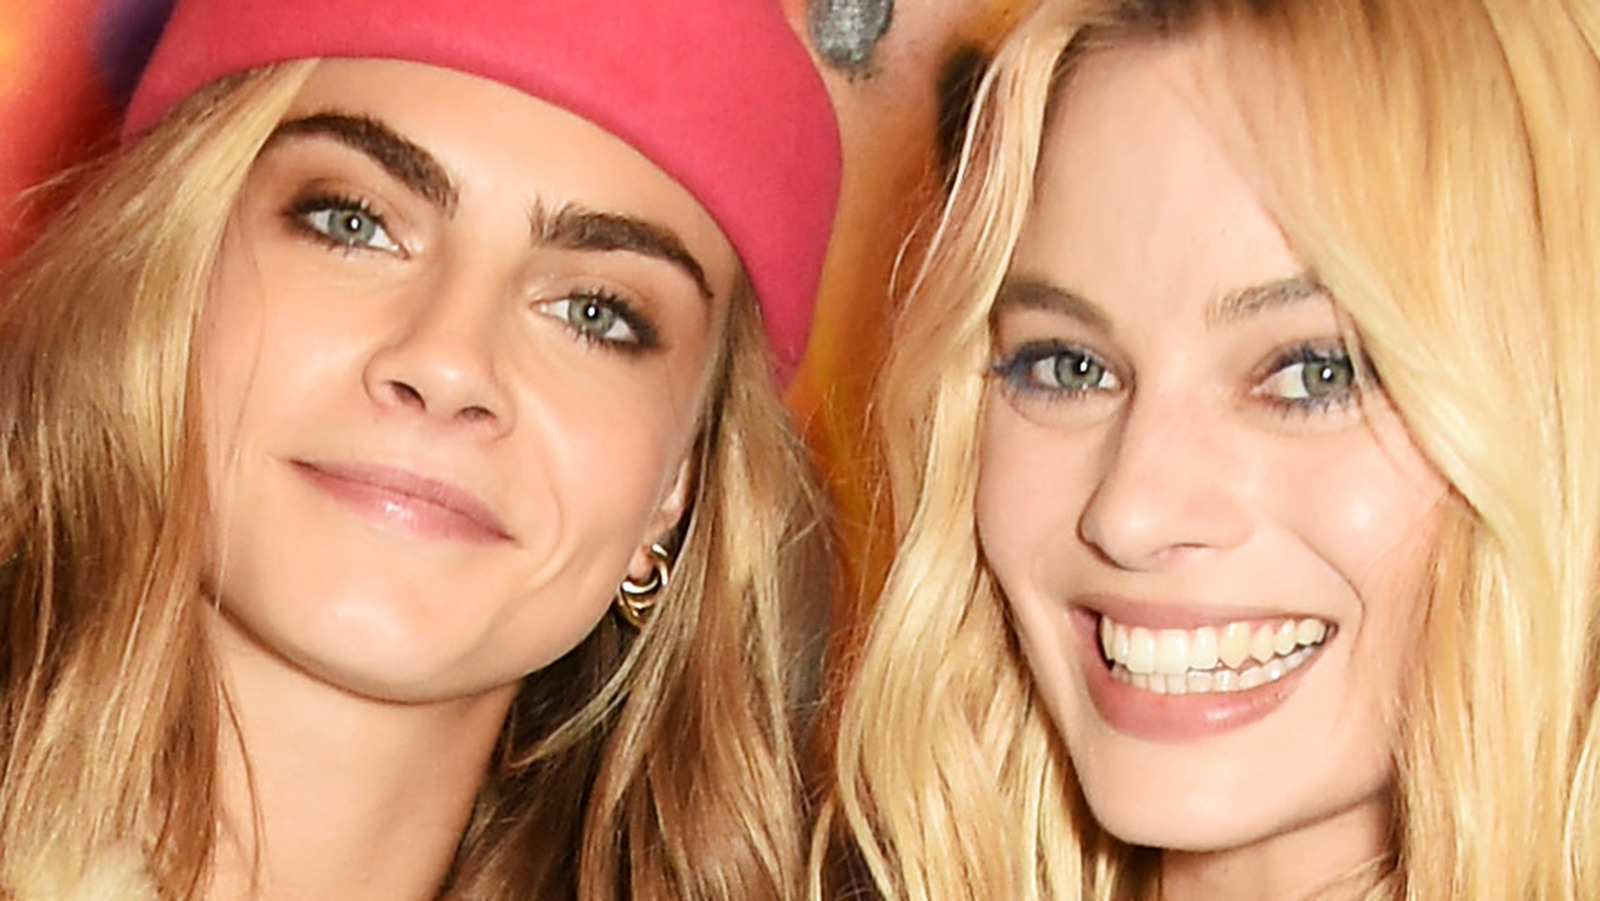 Cara Delevingne And Margot Robbies Latest Run In With Paparazzi